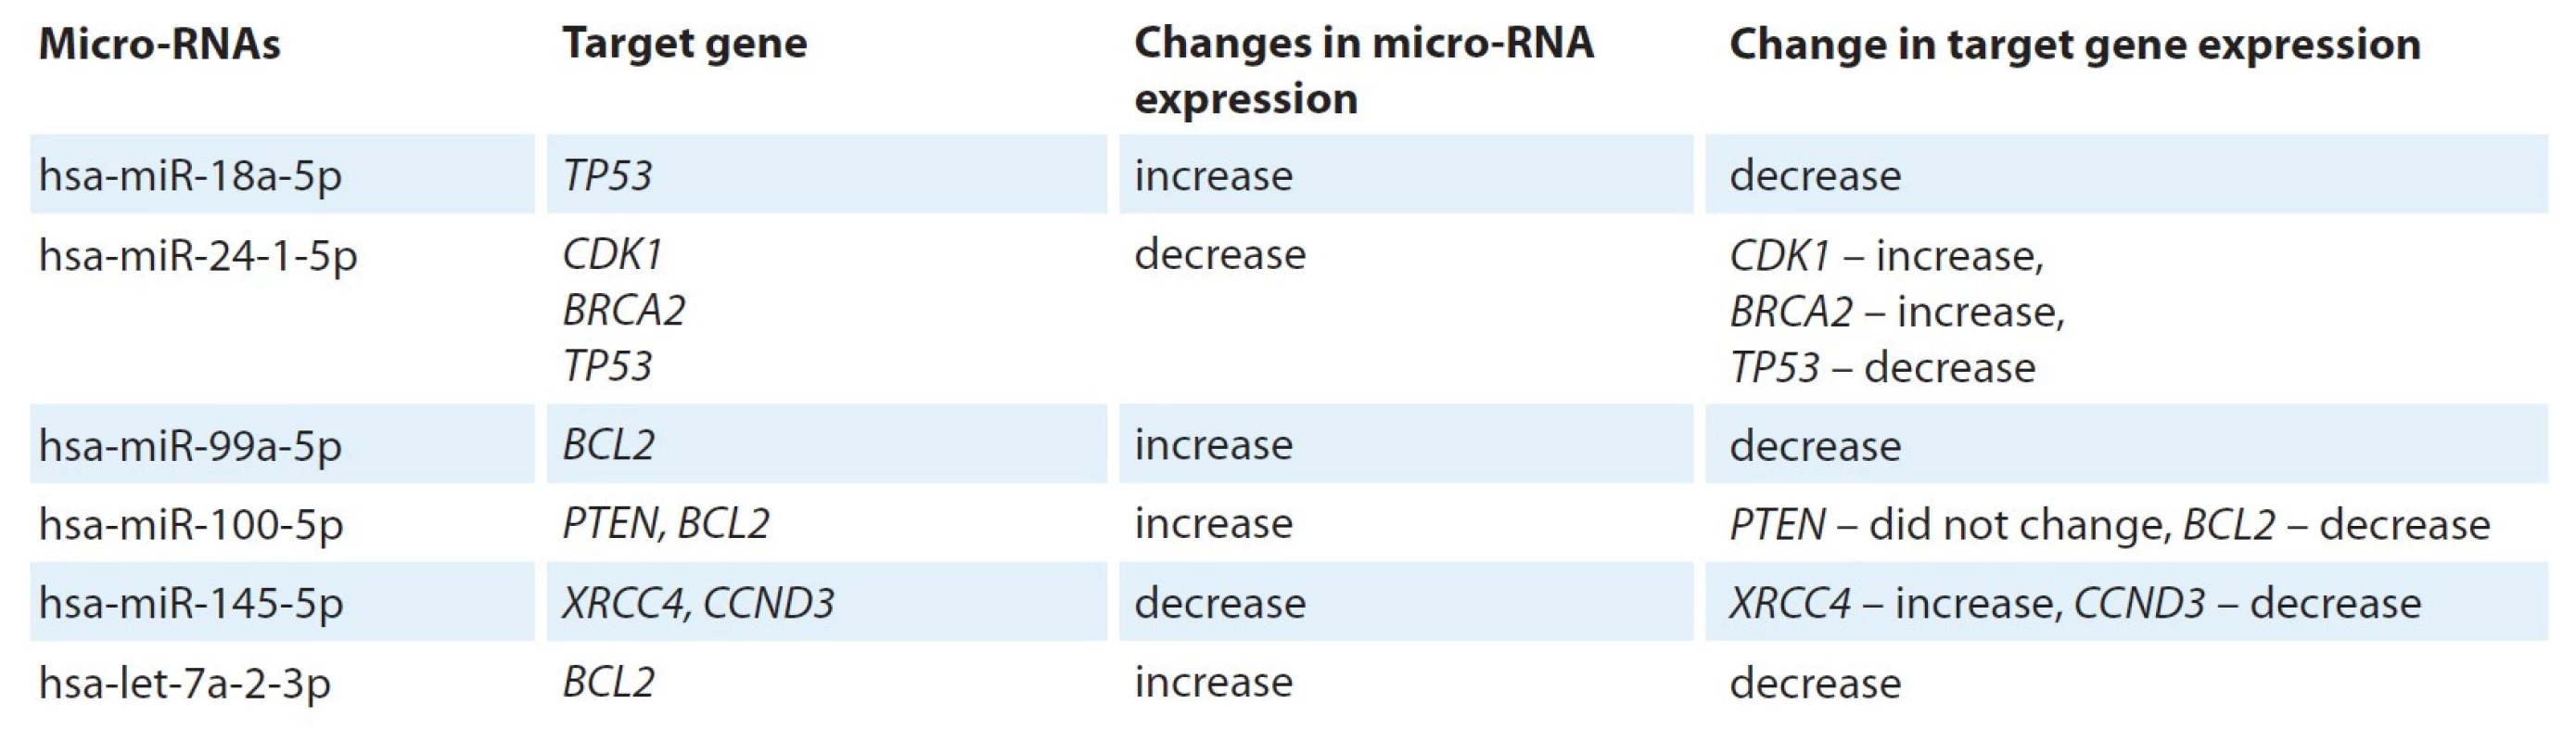 Micro-RNAs that altered expression in irradiated cells and their target genes.